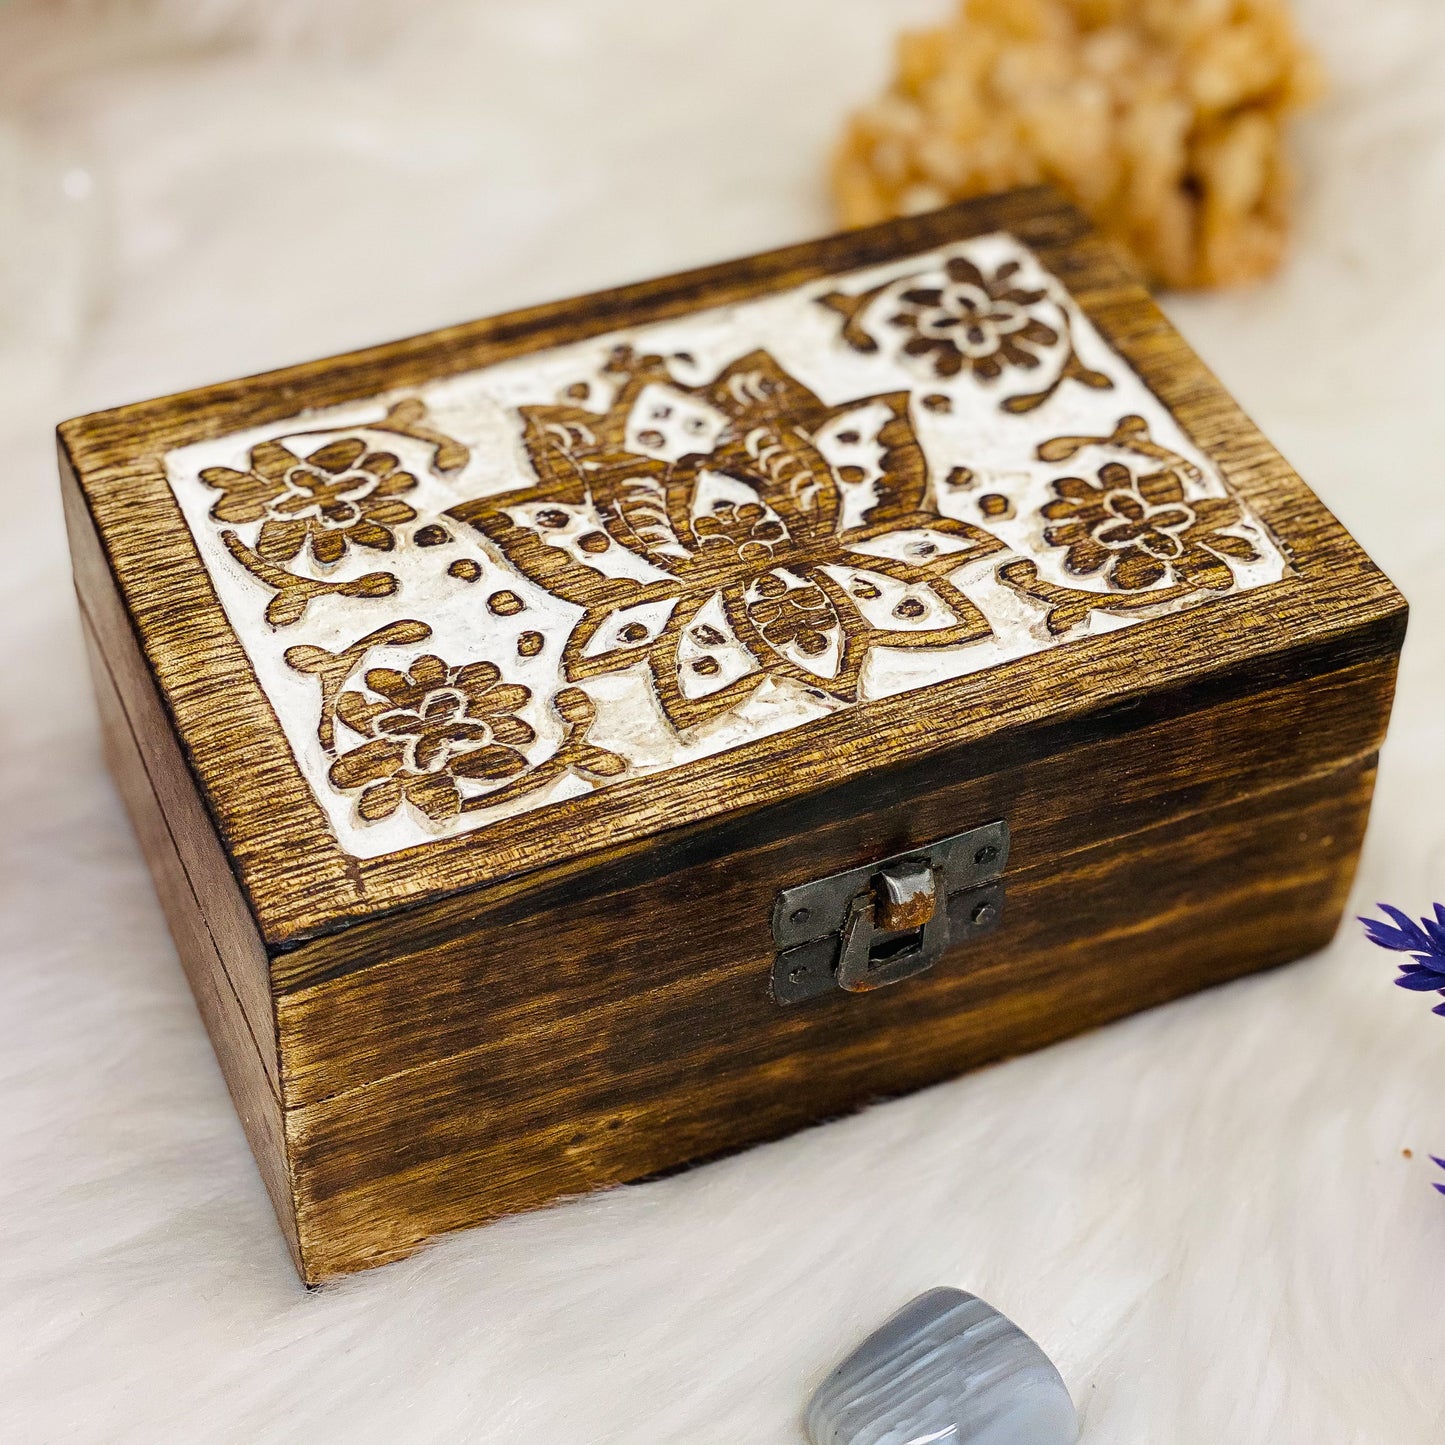 Lotus Carved Wooden Box